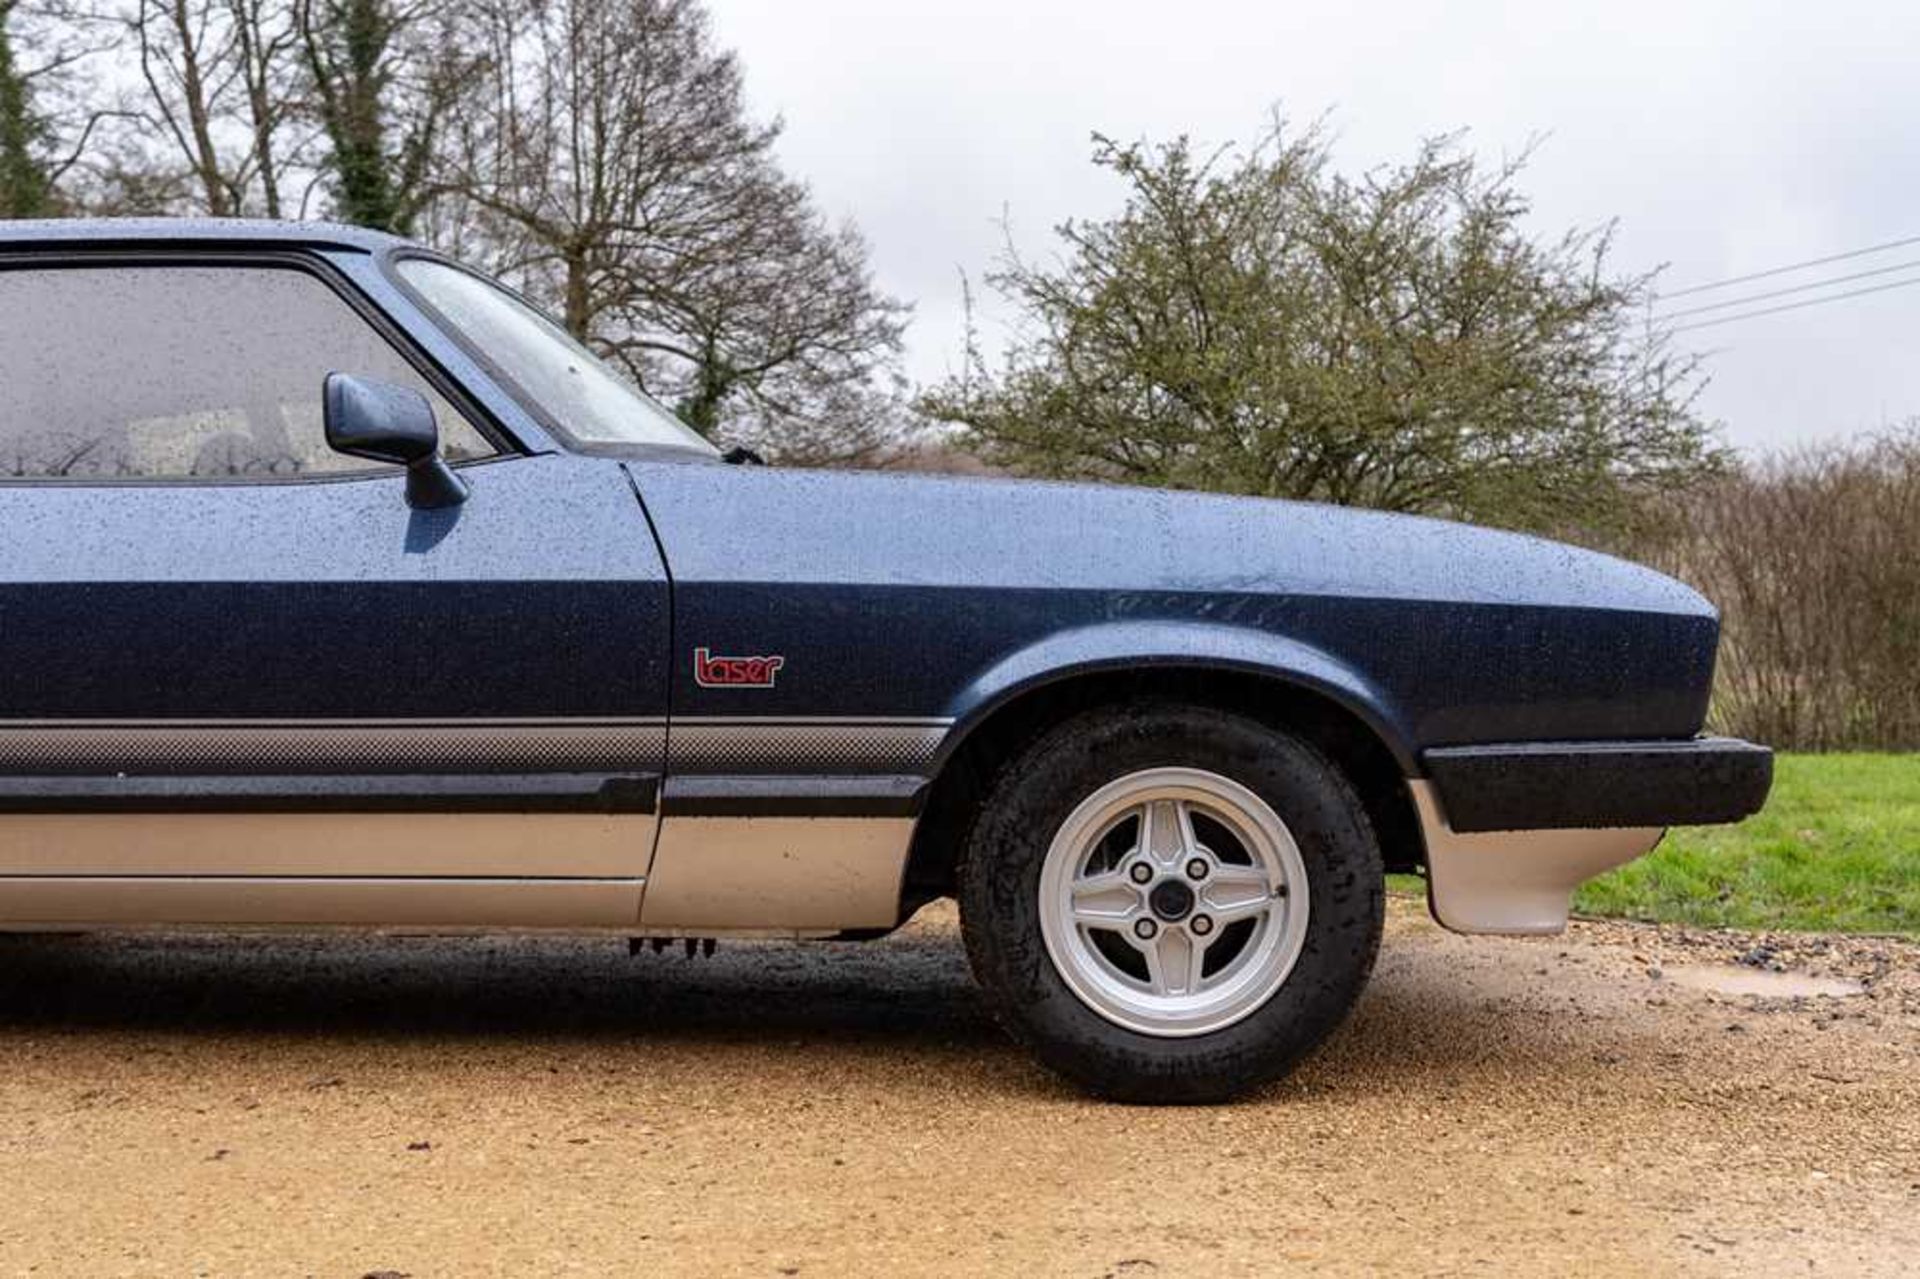 1985 Ford Capri Laser 2.0 Litre Warranted 55,300 miles from new - Image 9 of 67